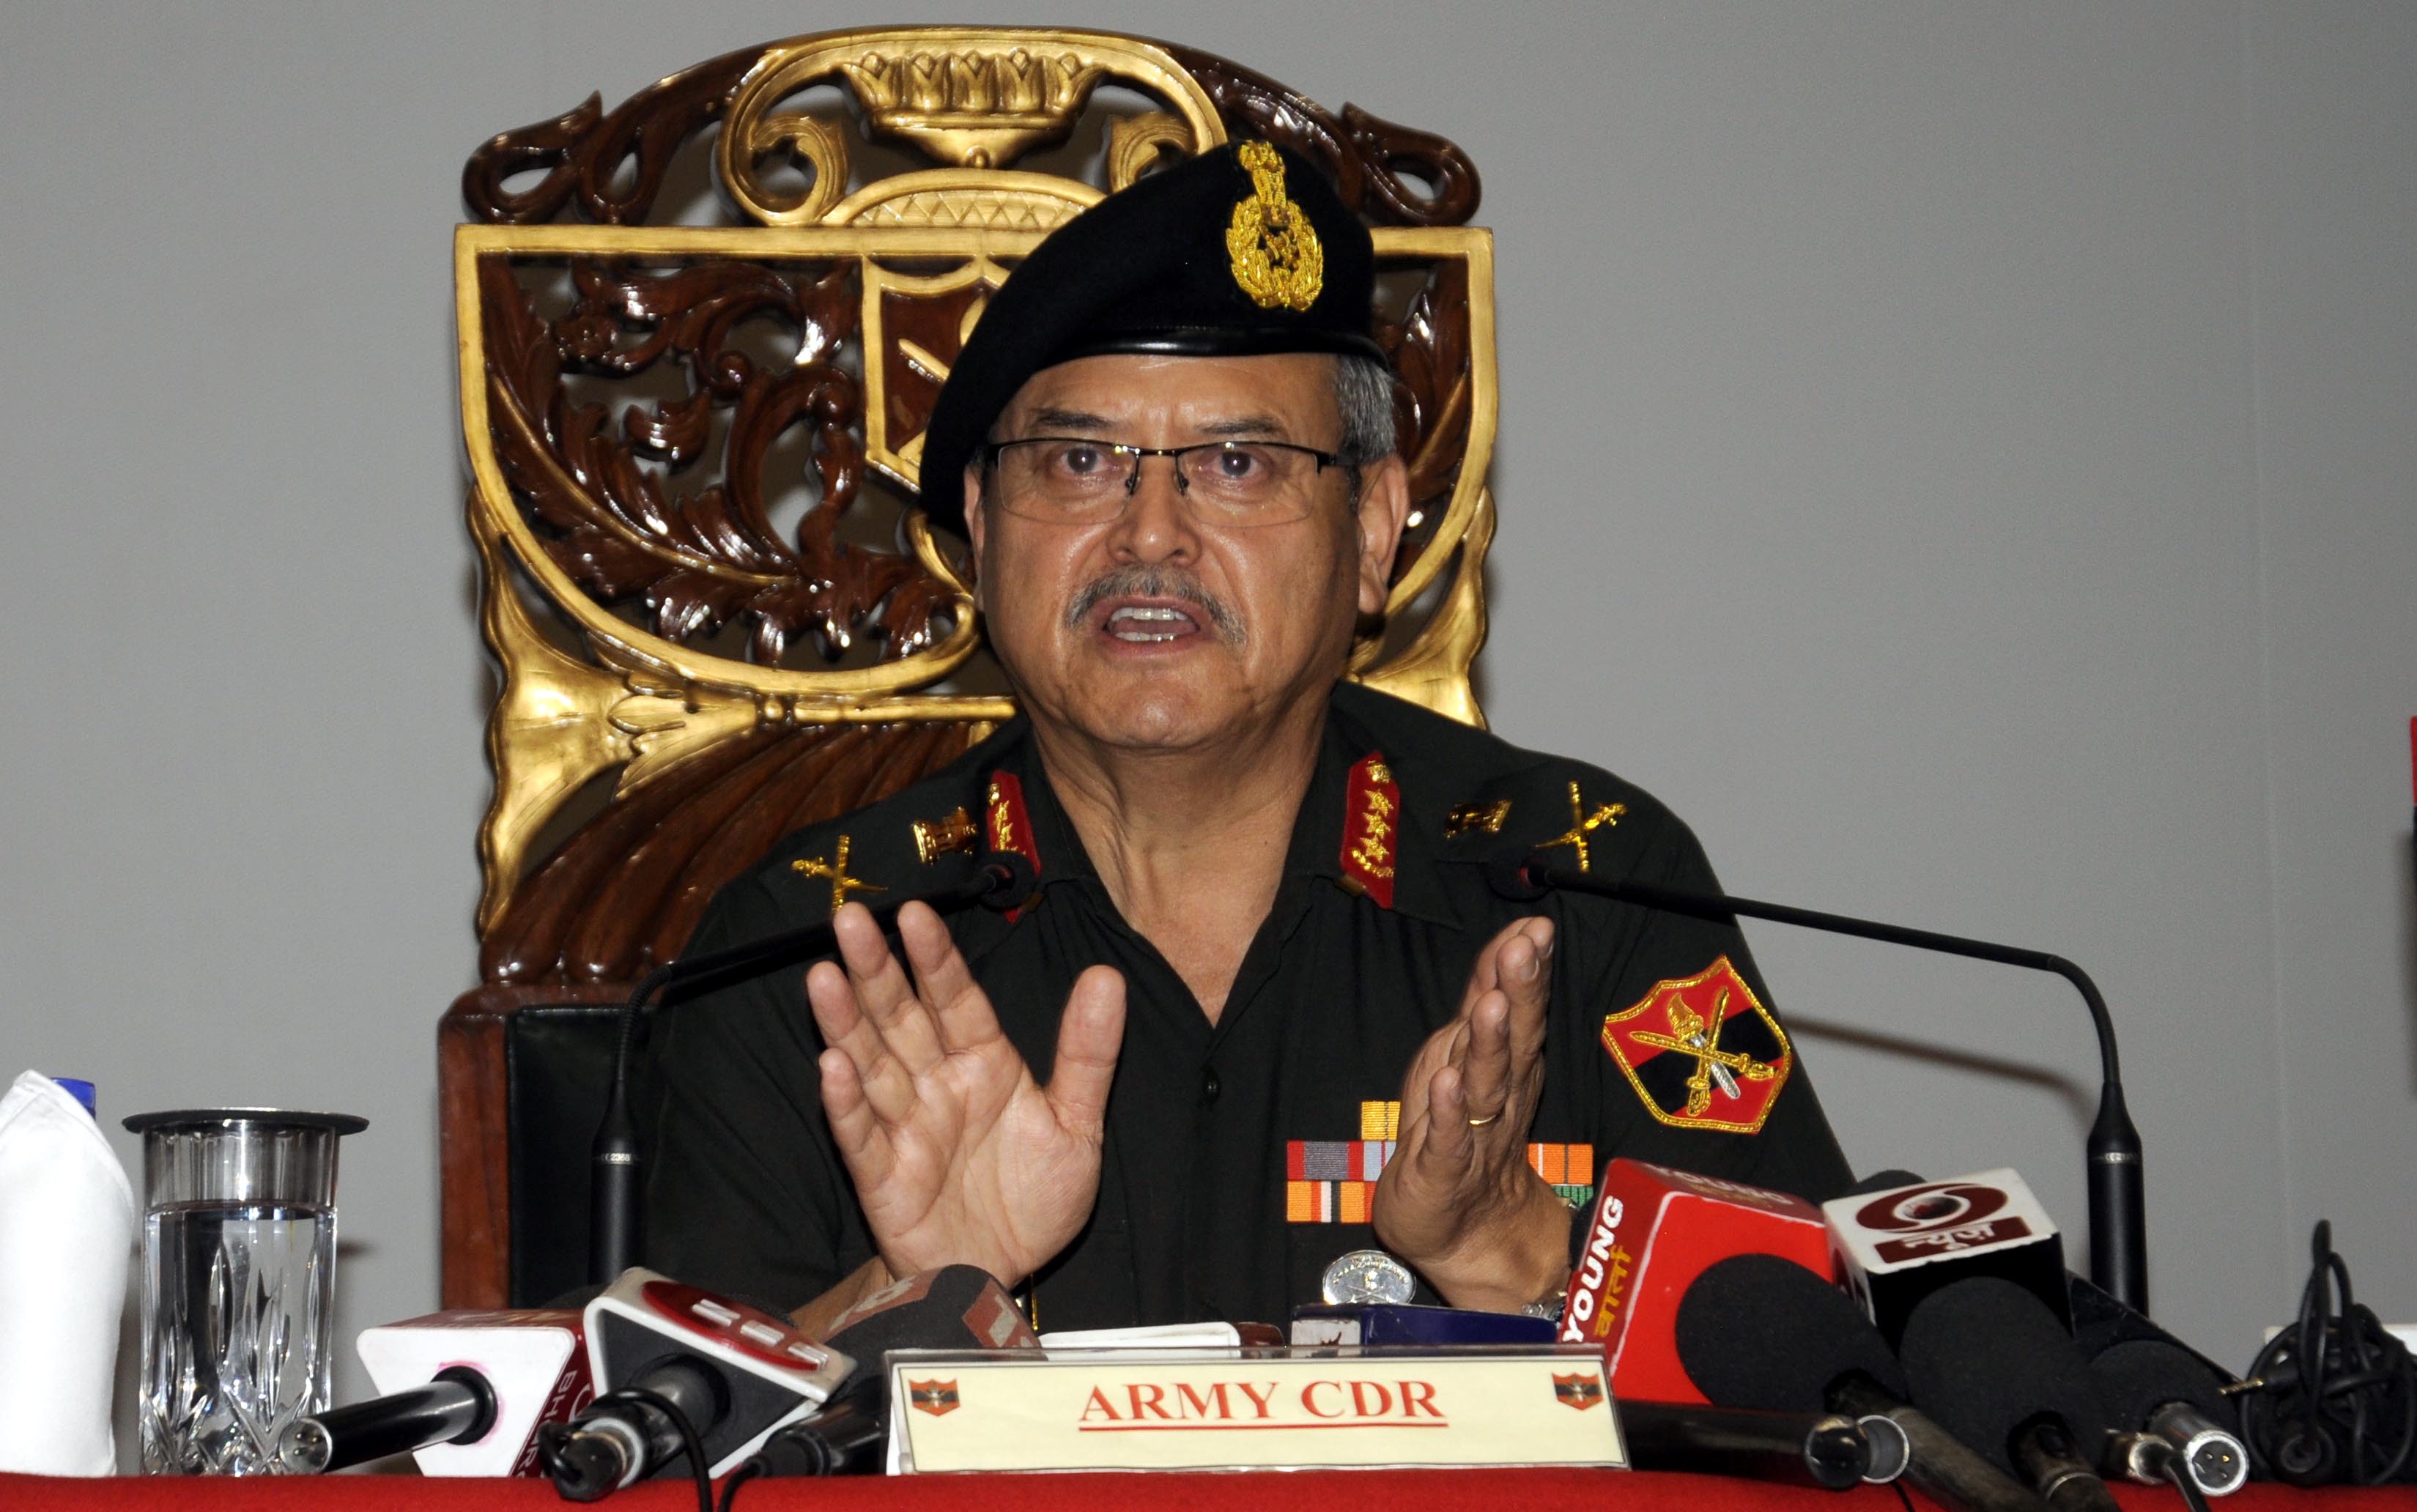 Government scheme 'Agnipath' chance for youth to serve in Army: Lt Gen SS Mahal